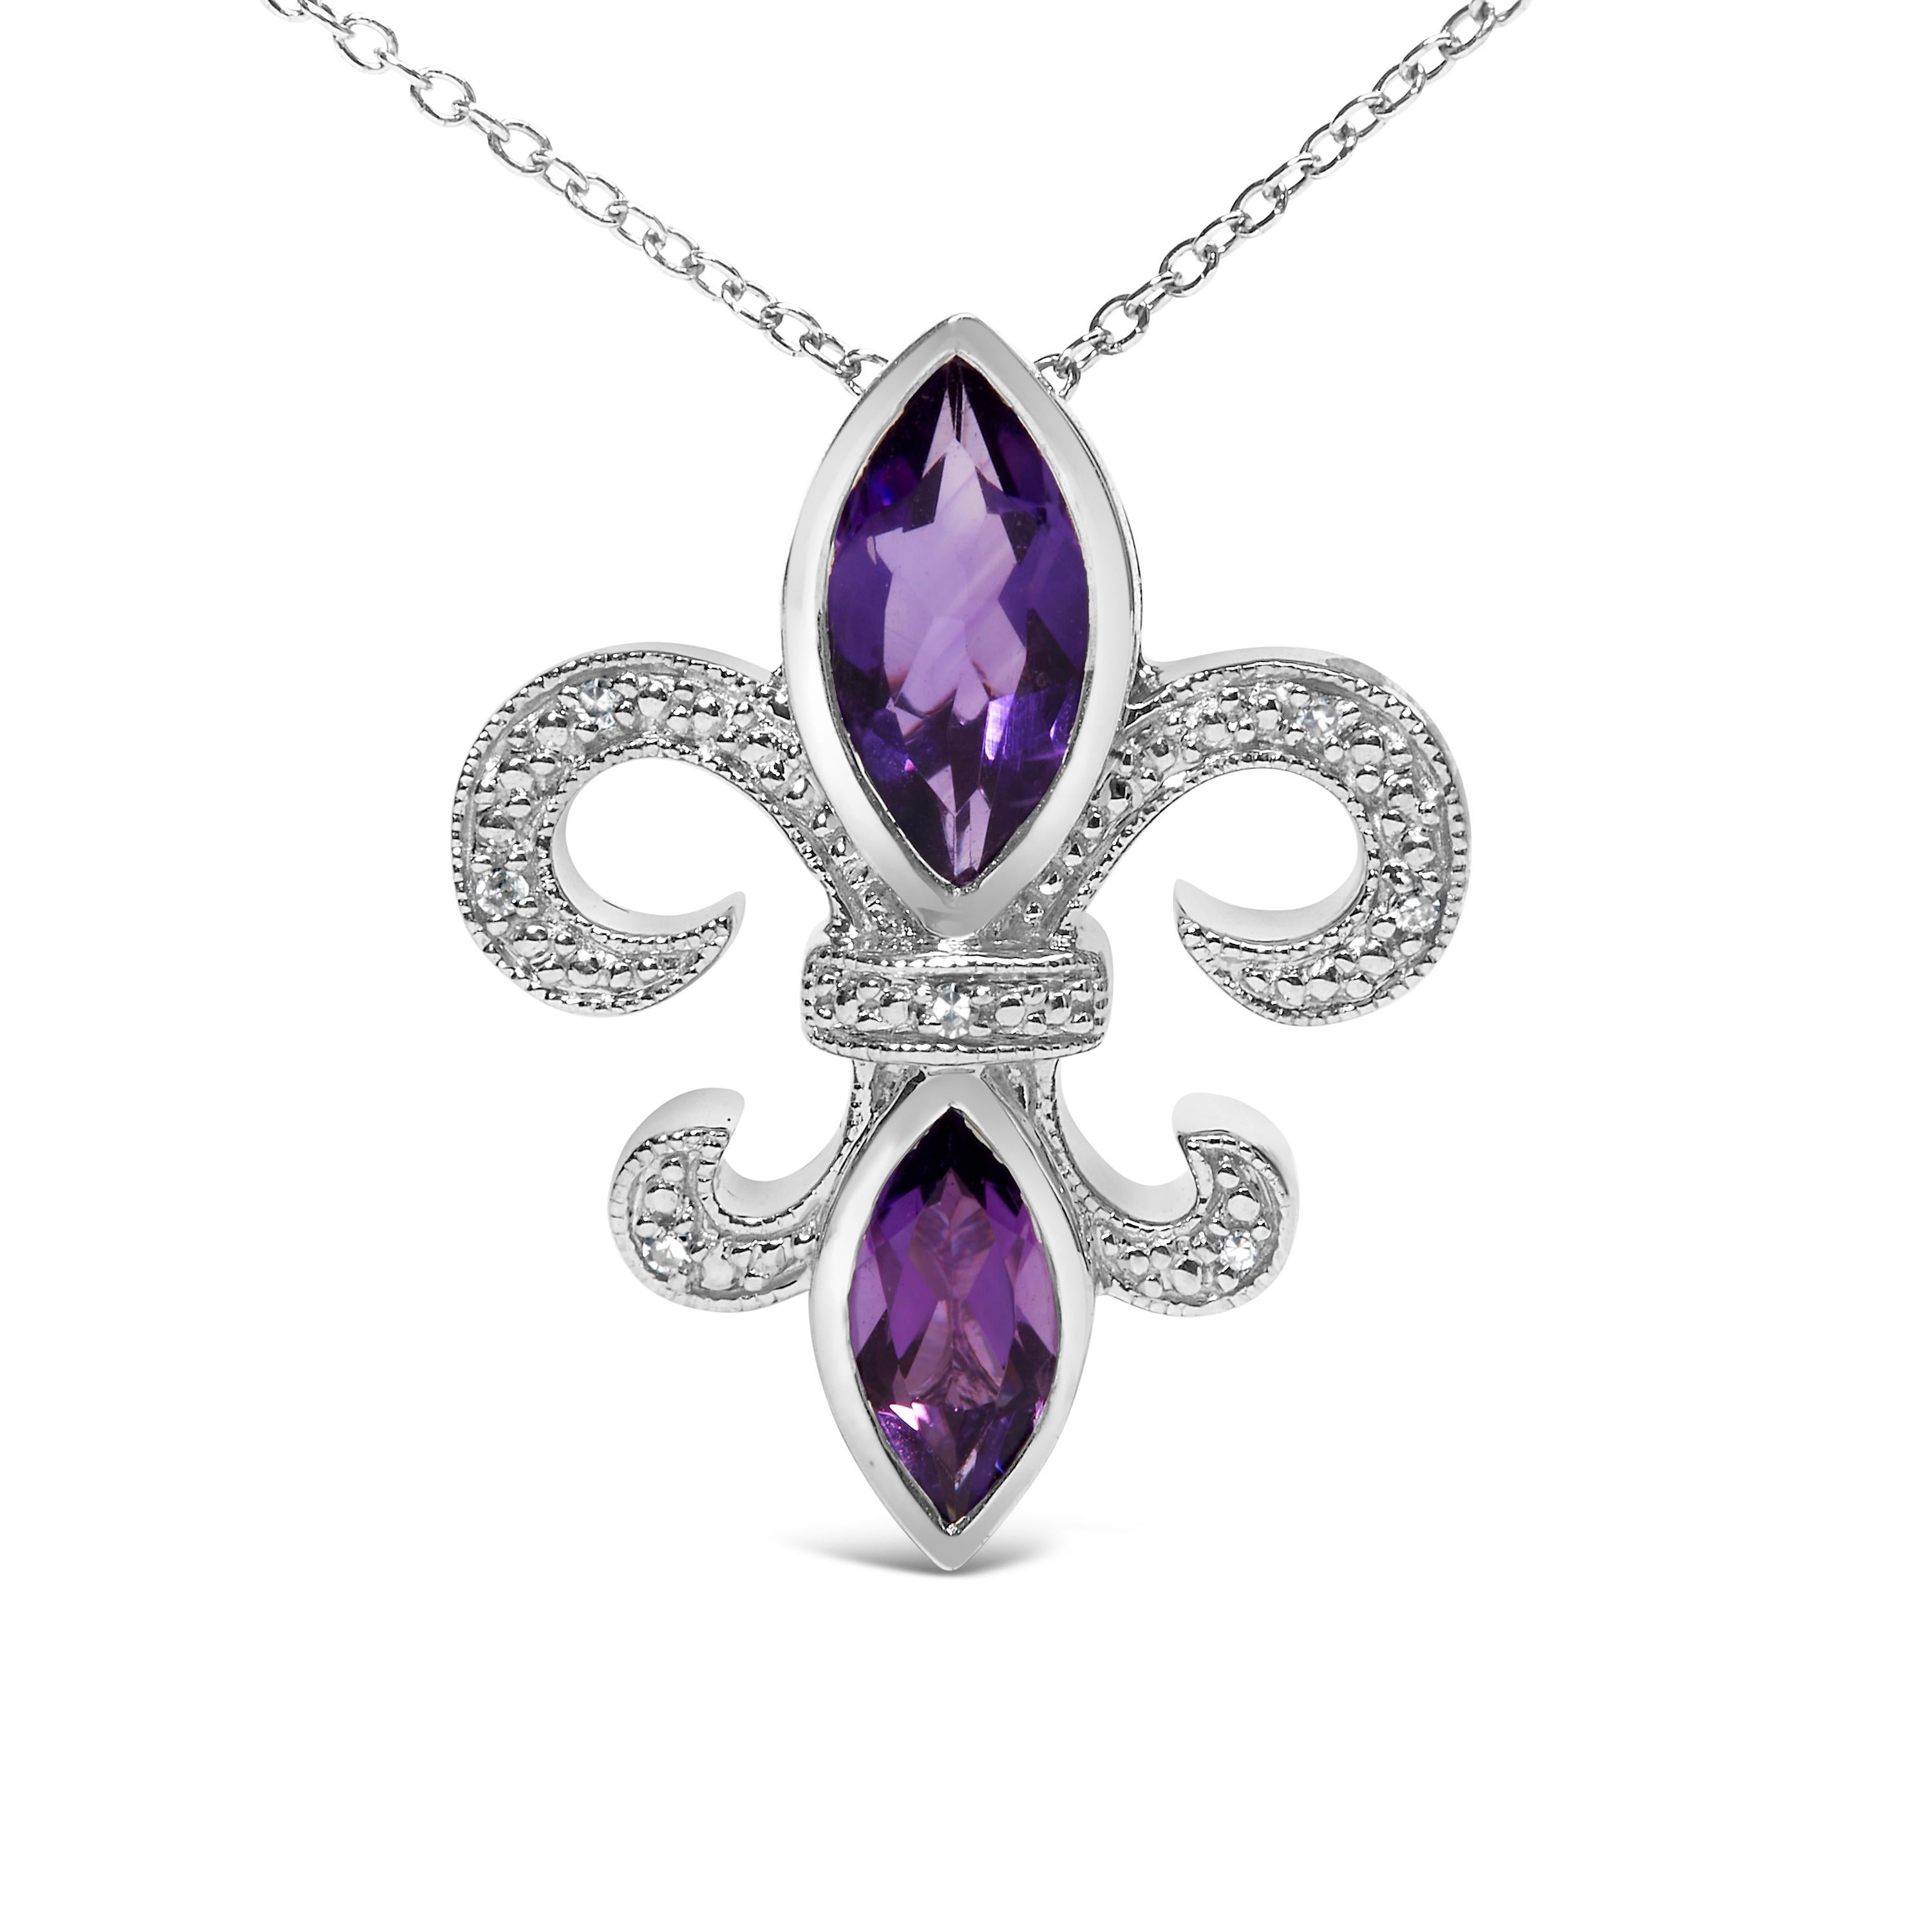 Indulge in the captivating allure of this exquisite pendant necklace. Crafted from .925 sterling silver, it showcases a marquise-shaped purple amethyst gemstone, radiating elegance and charm. Adorned with a delicate fleur de lis design, this